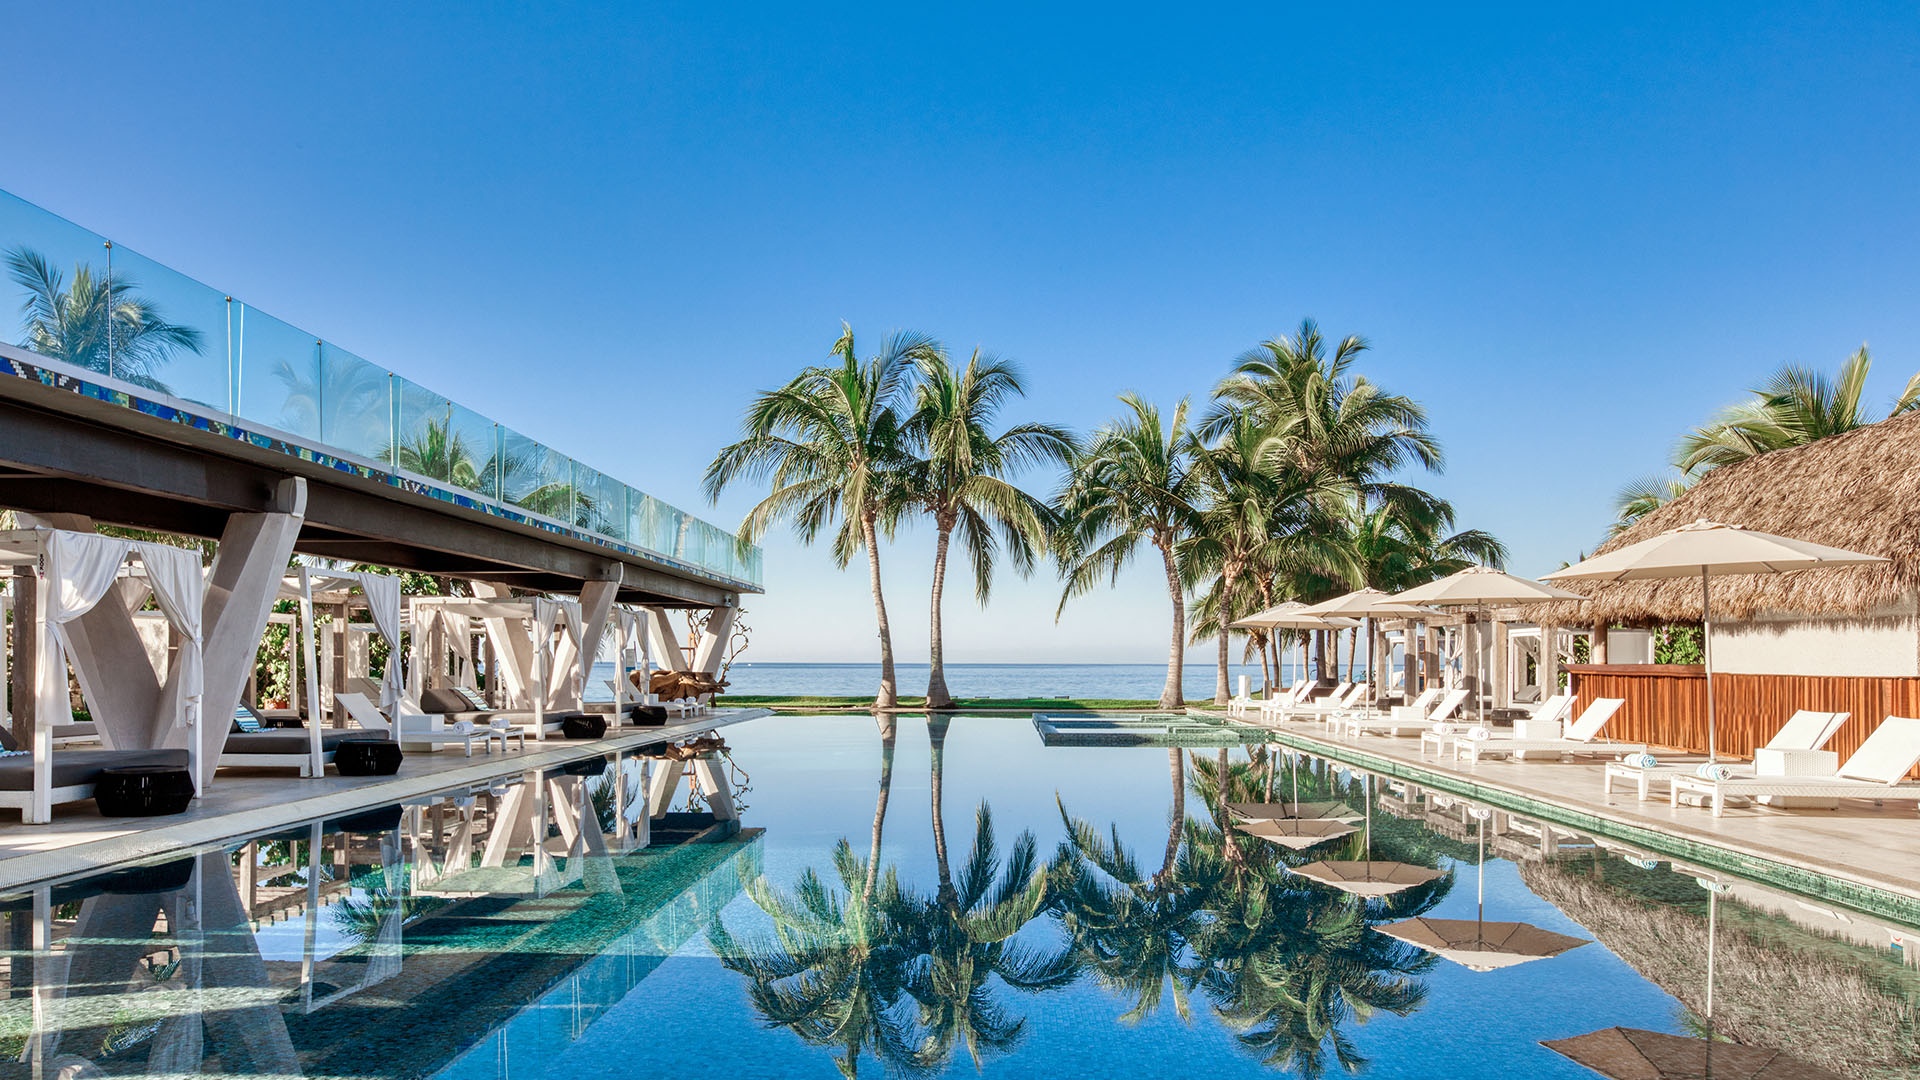 Pool cabanas and palm trees at W Punta Mita in Costa Rica